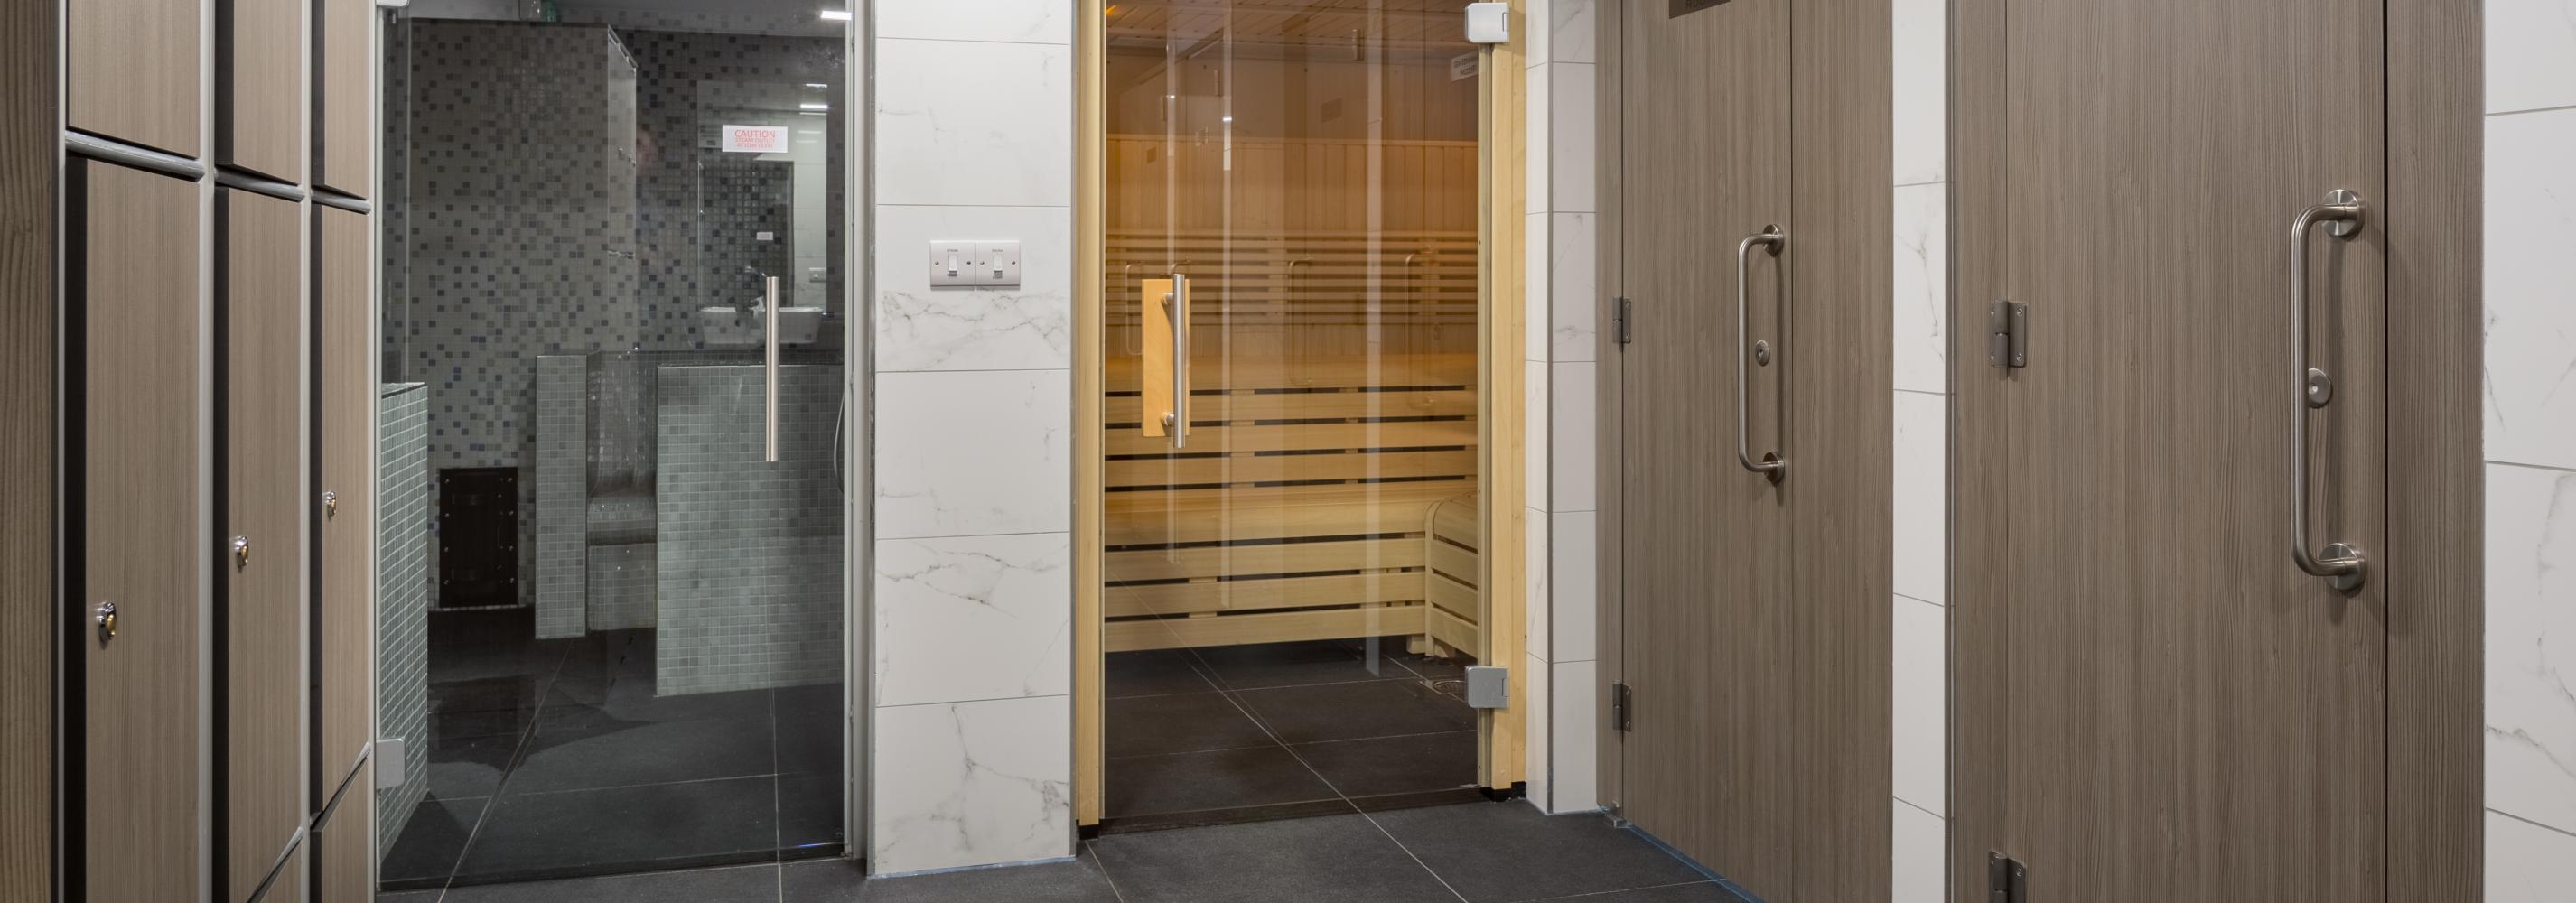 Sauna and steam room at The Ascent